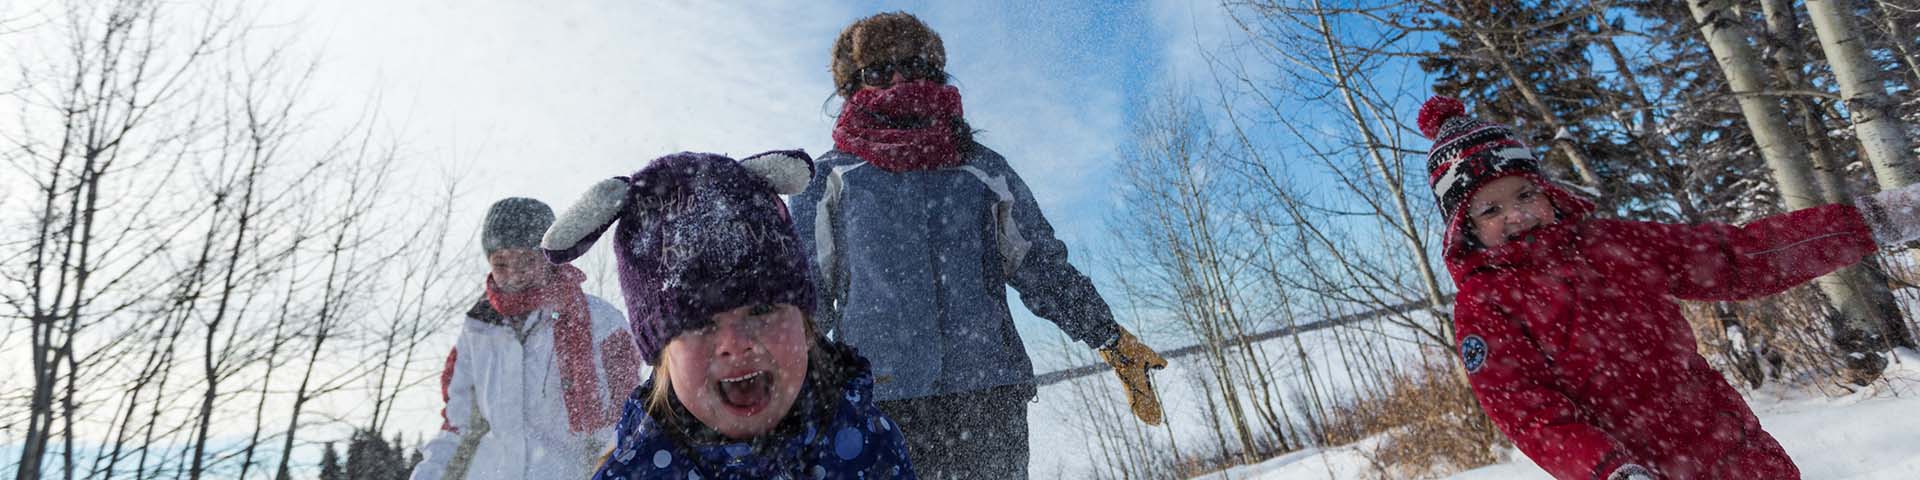 Family plays in the snow, Elk Island National Park